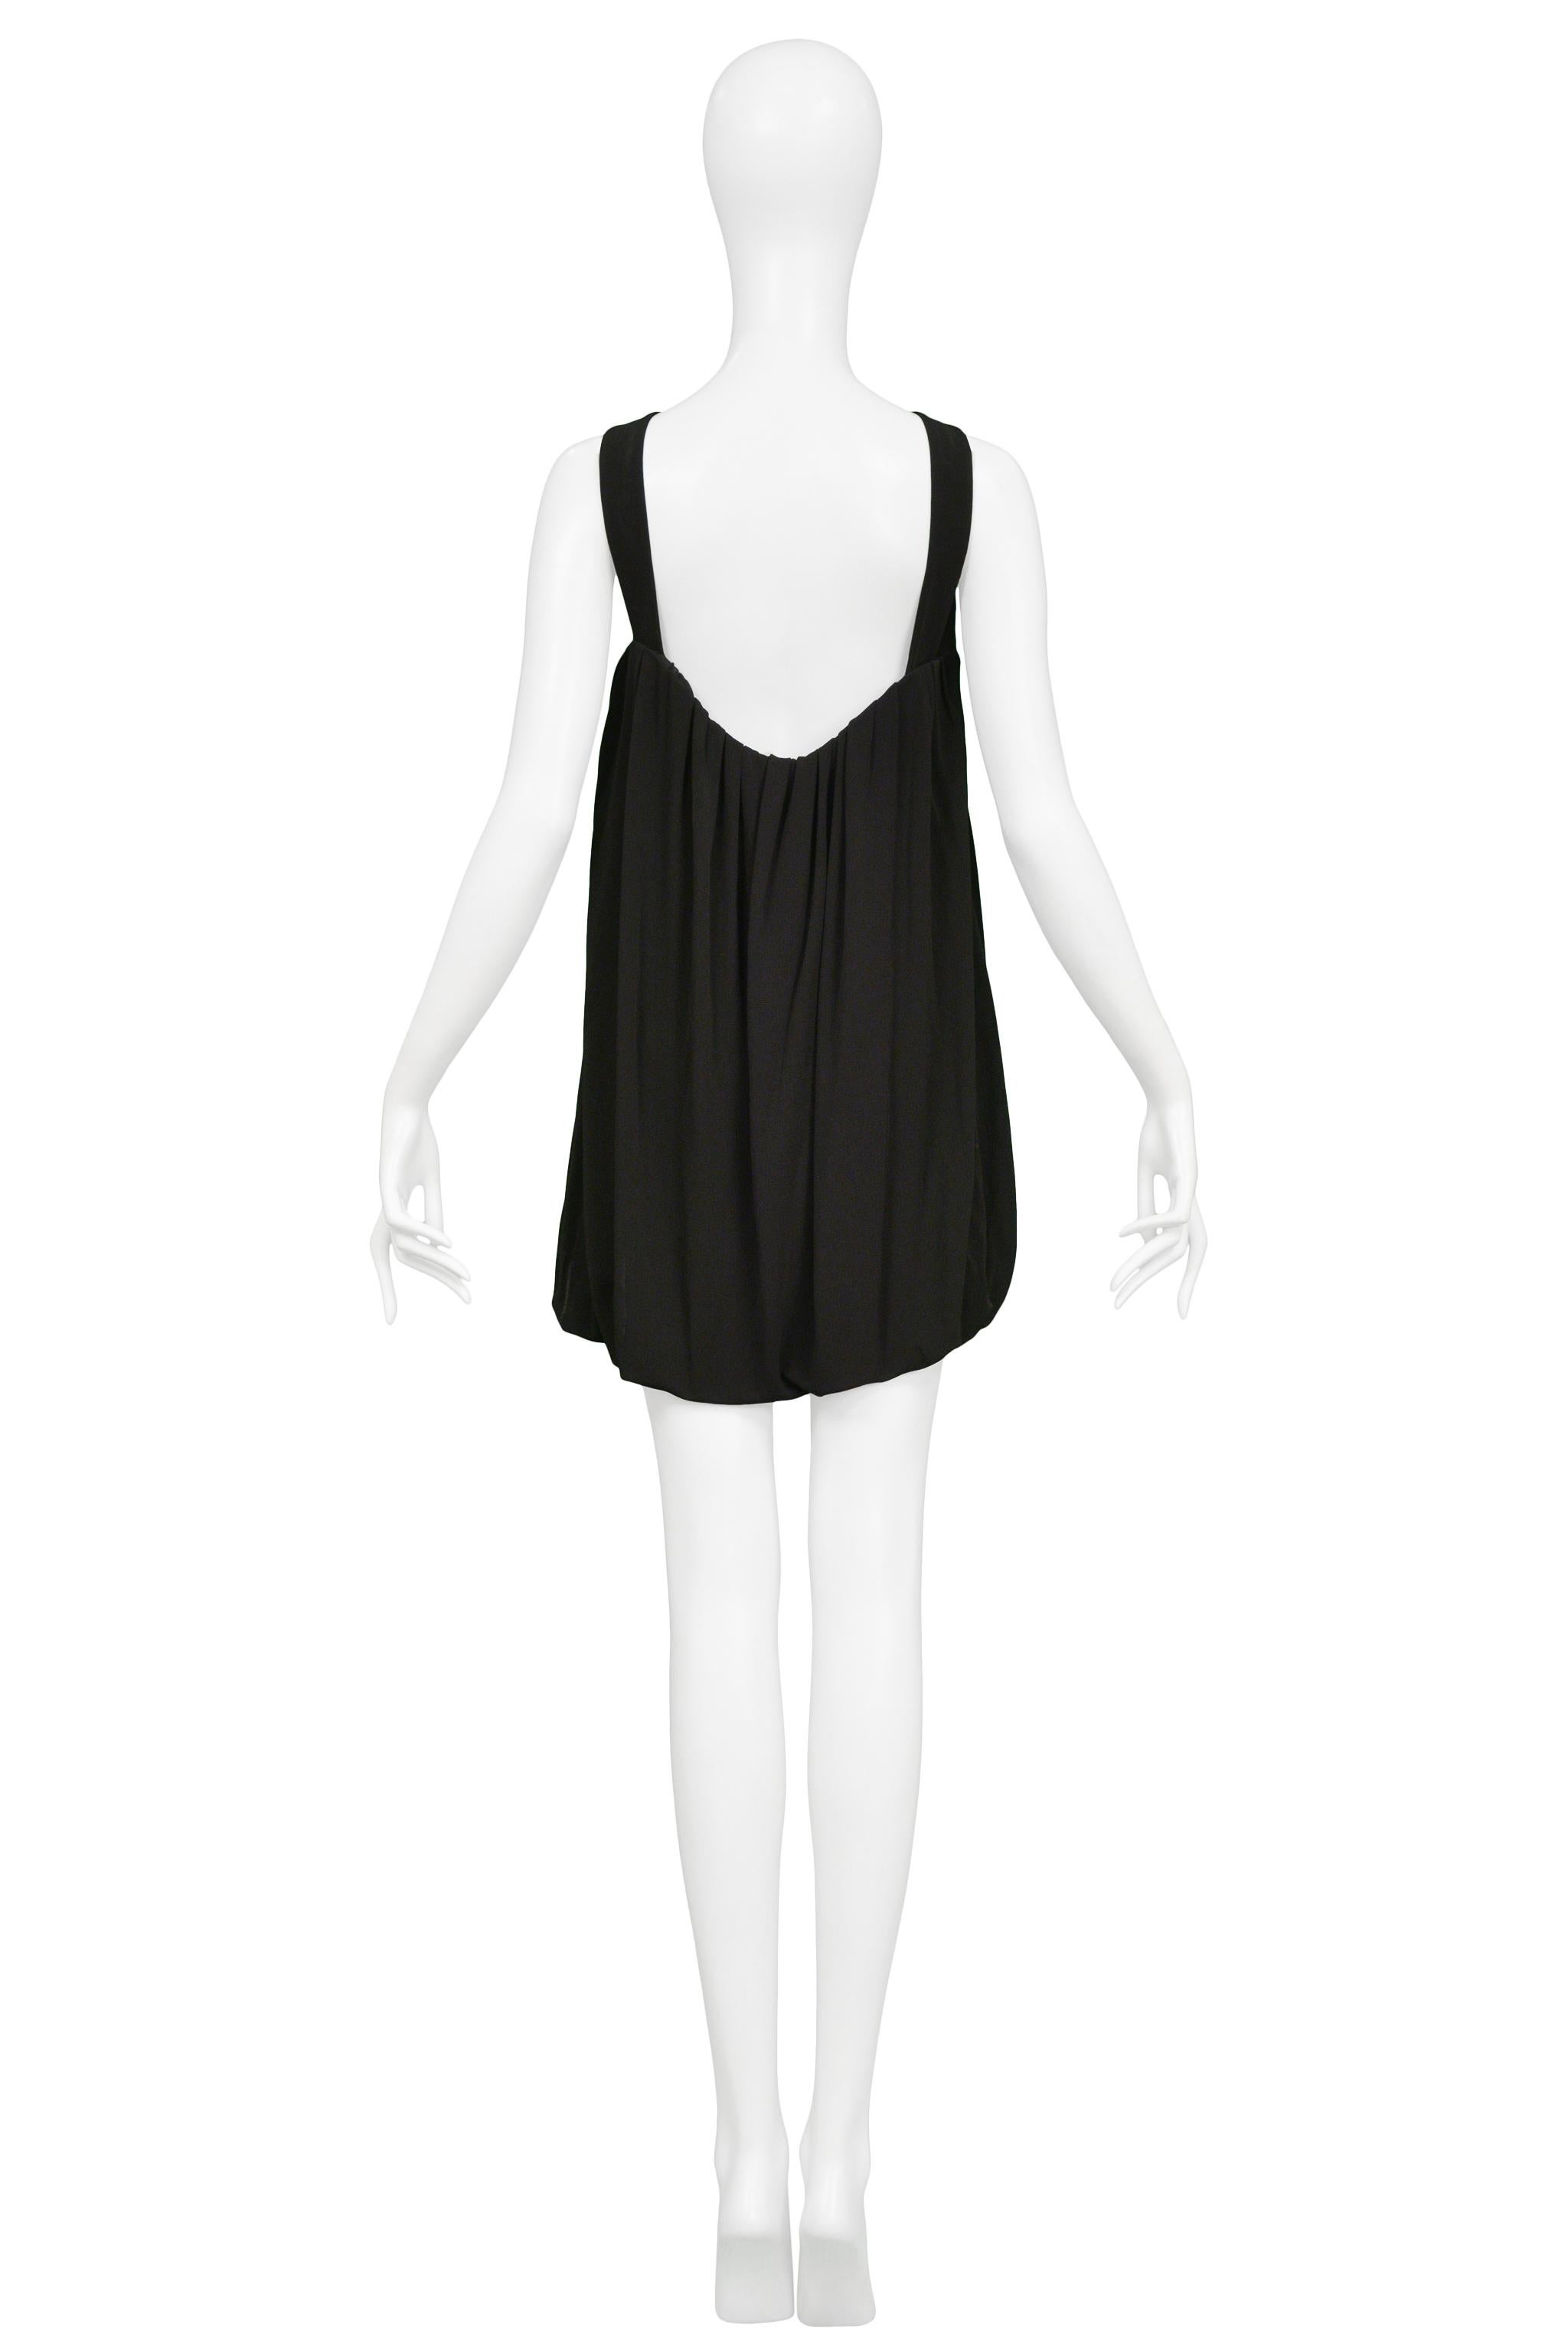 Balenciaga by Ghesquiere Black Cocktail Mini Dress 2007 In Excellent Condition For Sale In Los Angeles, CA